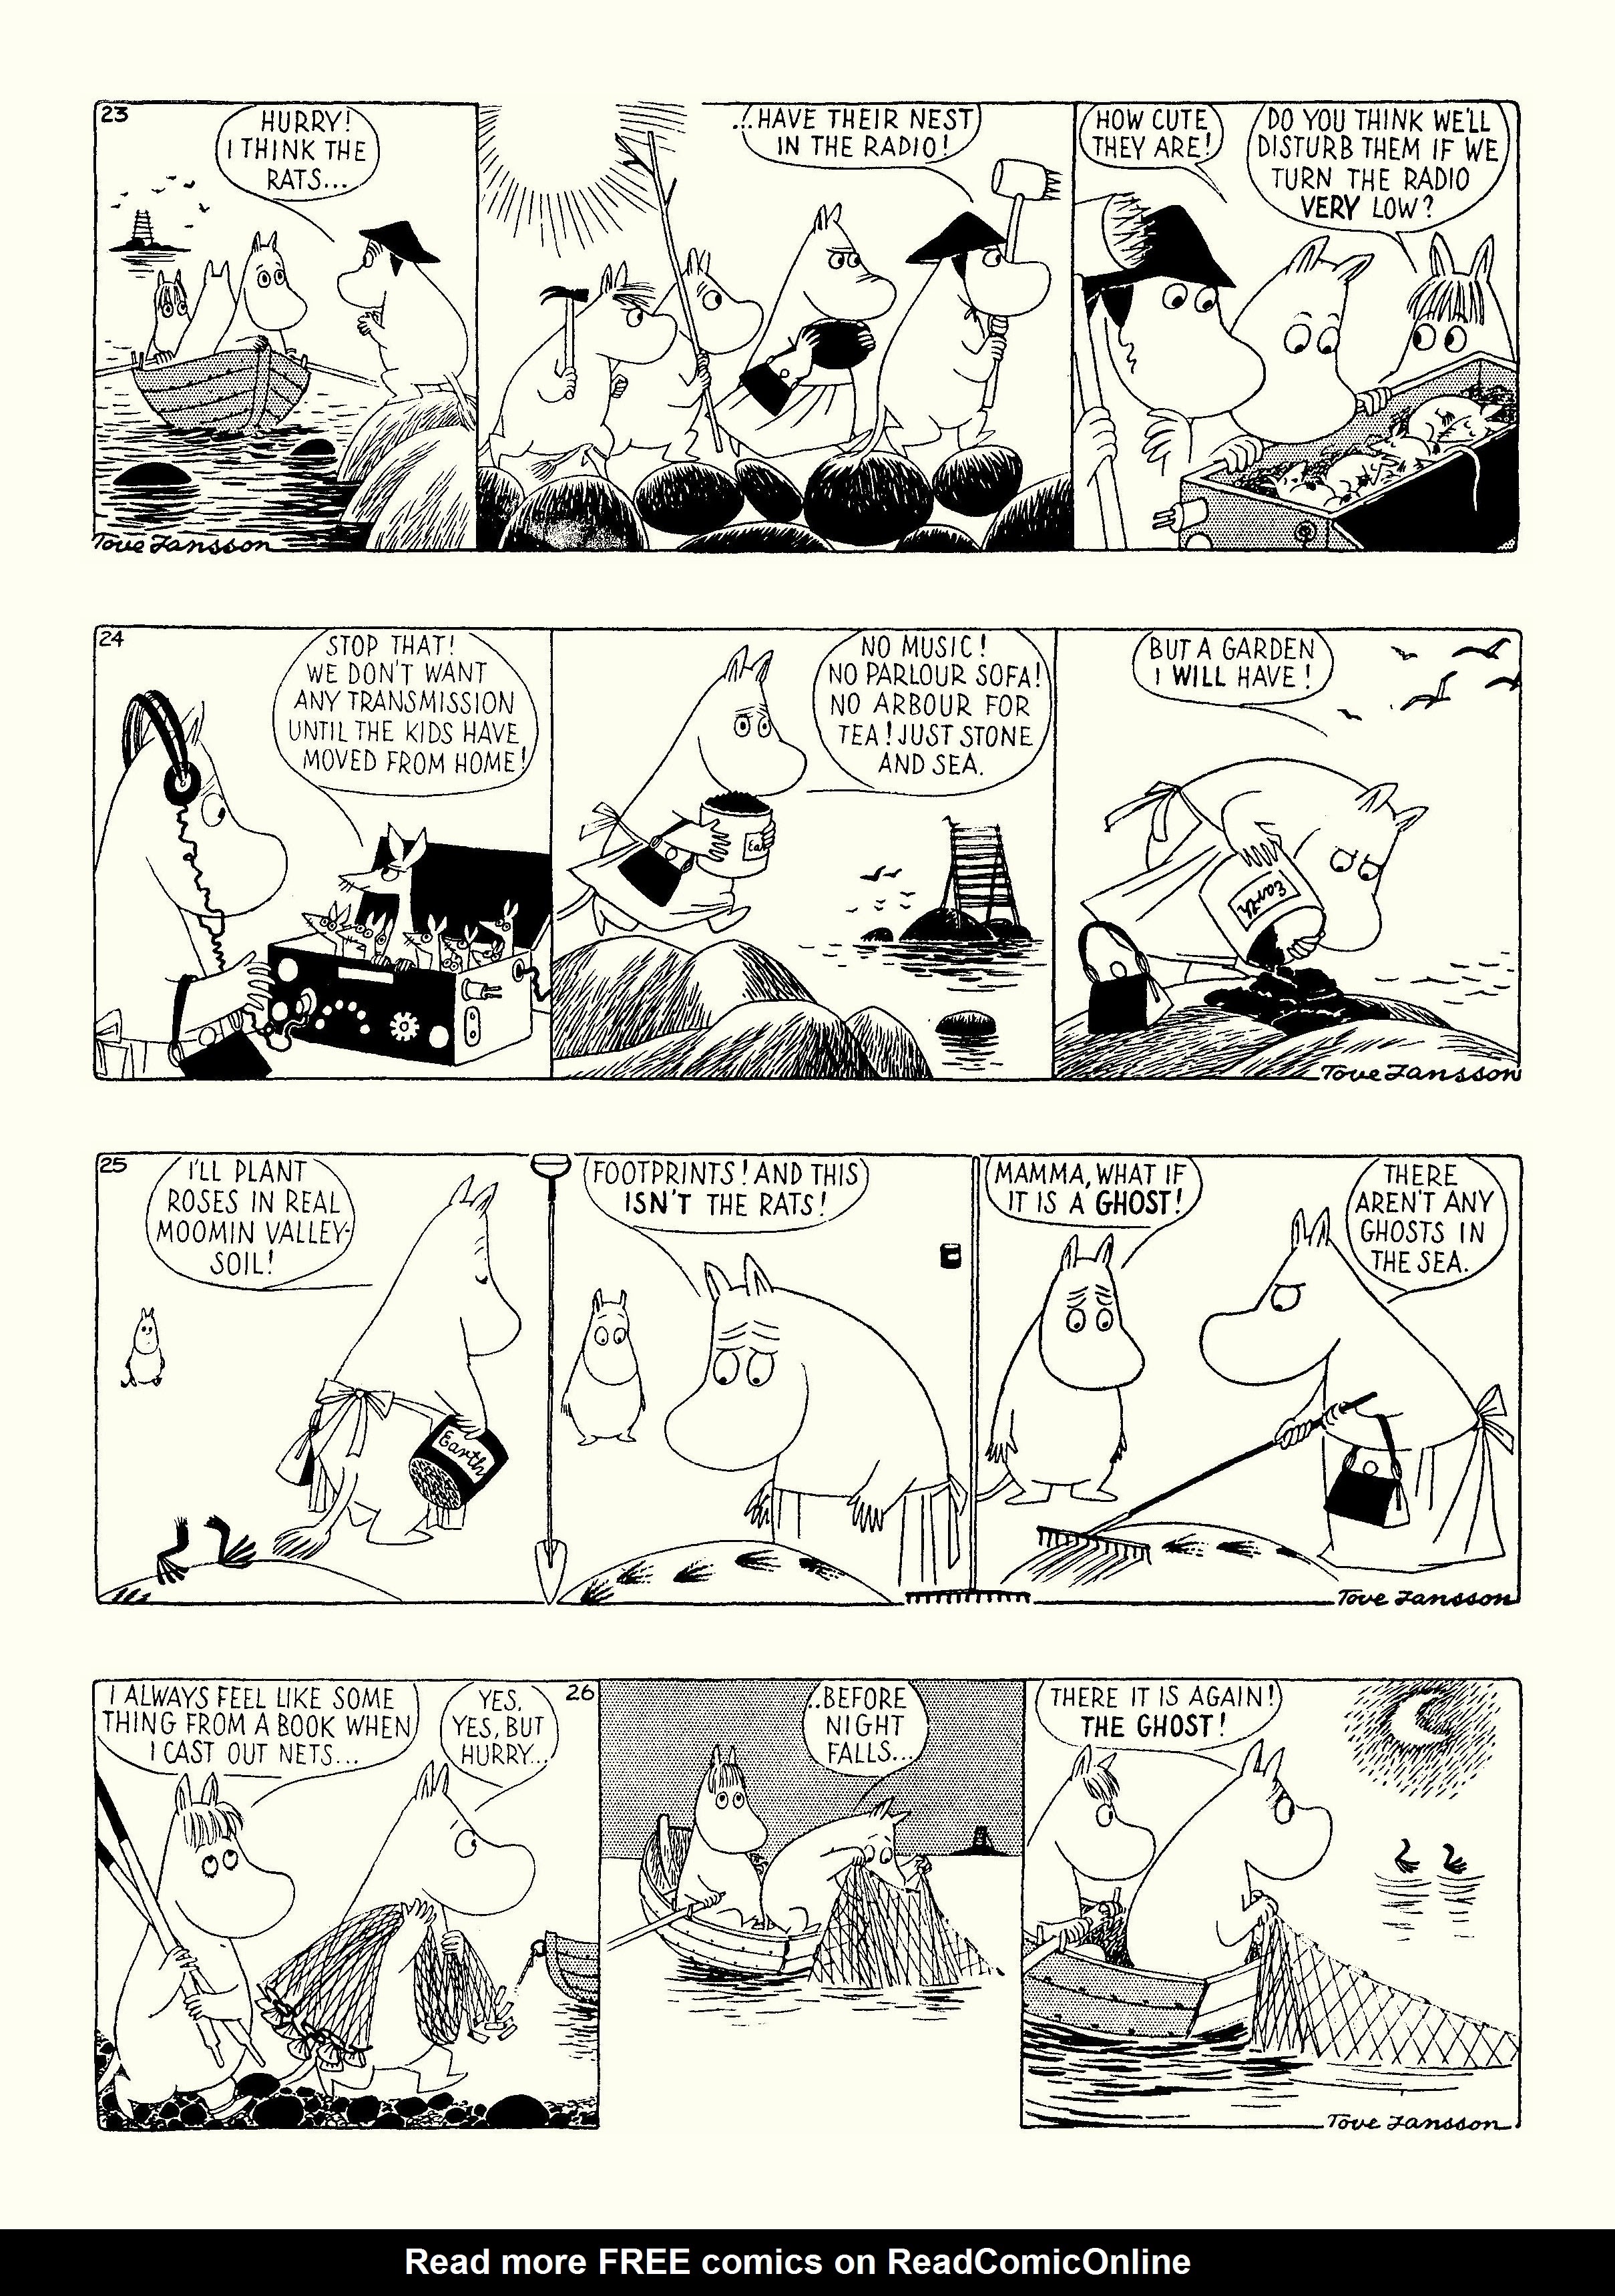 Read online Moomin: The Complete Tove Jansson Comic Strip comic -  Issue # TPB 3 - 61